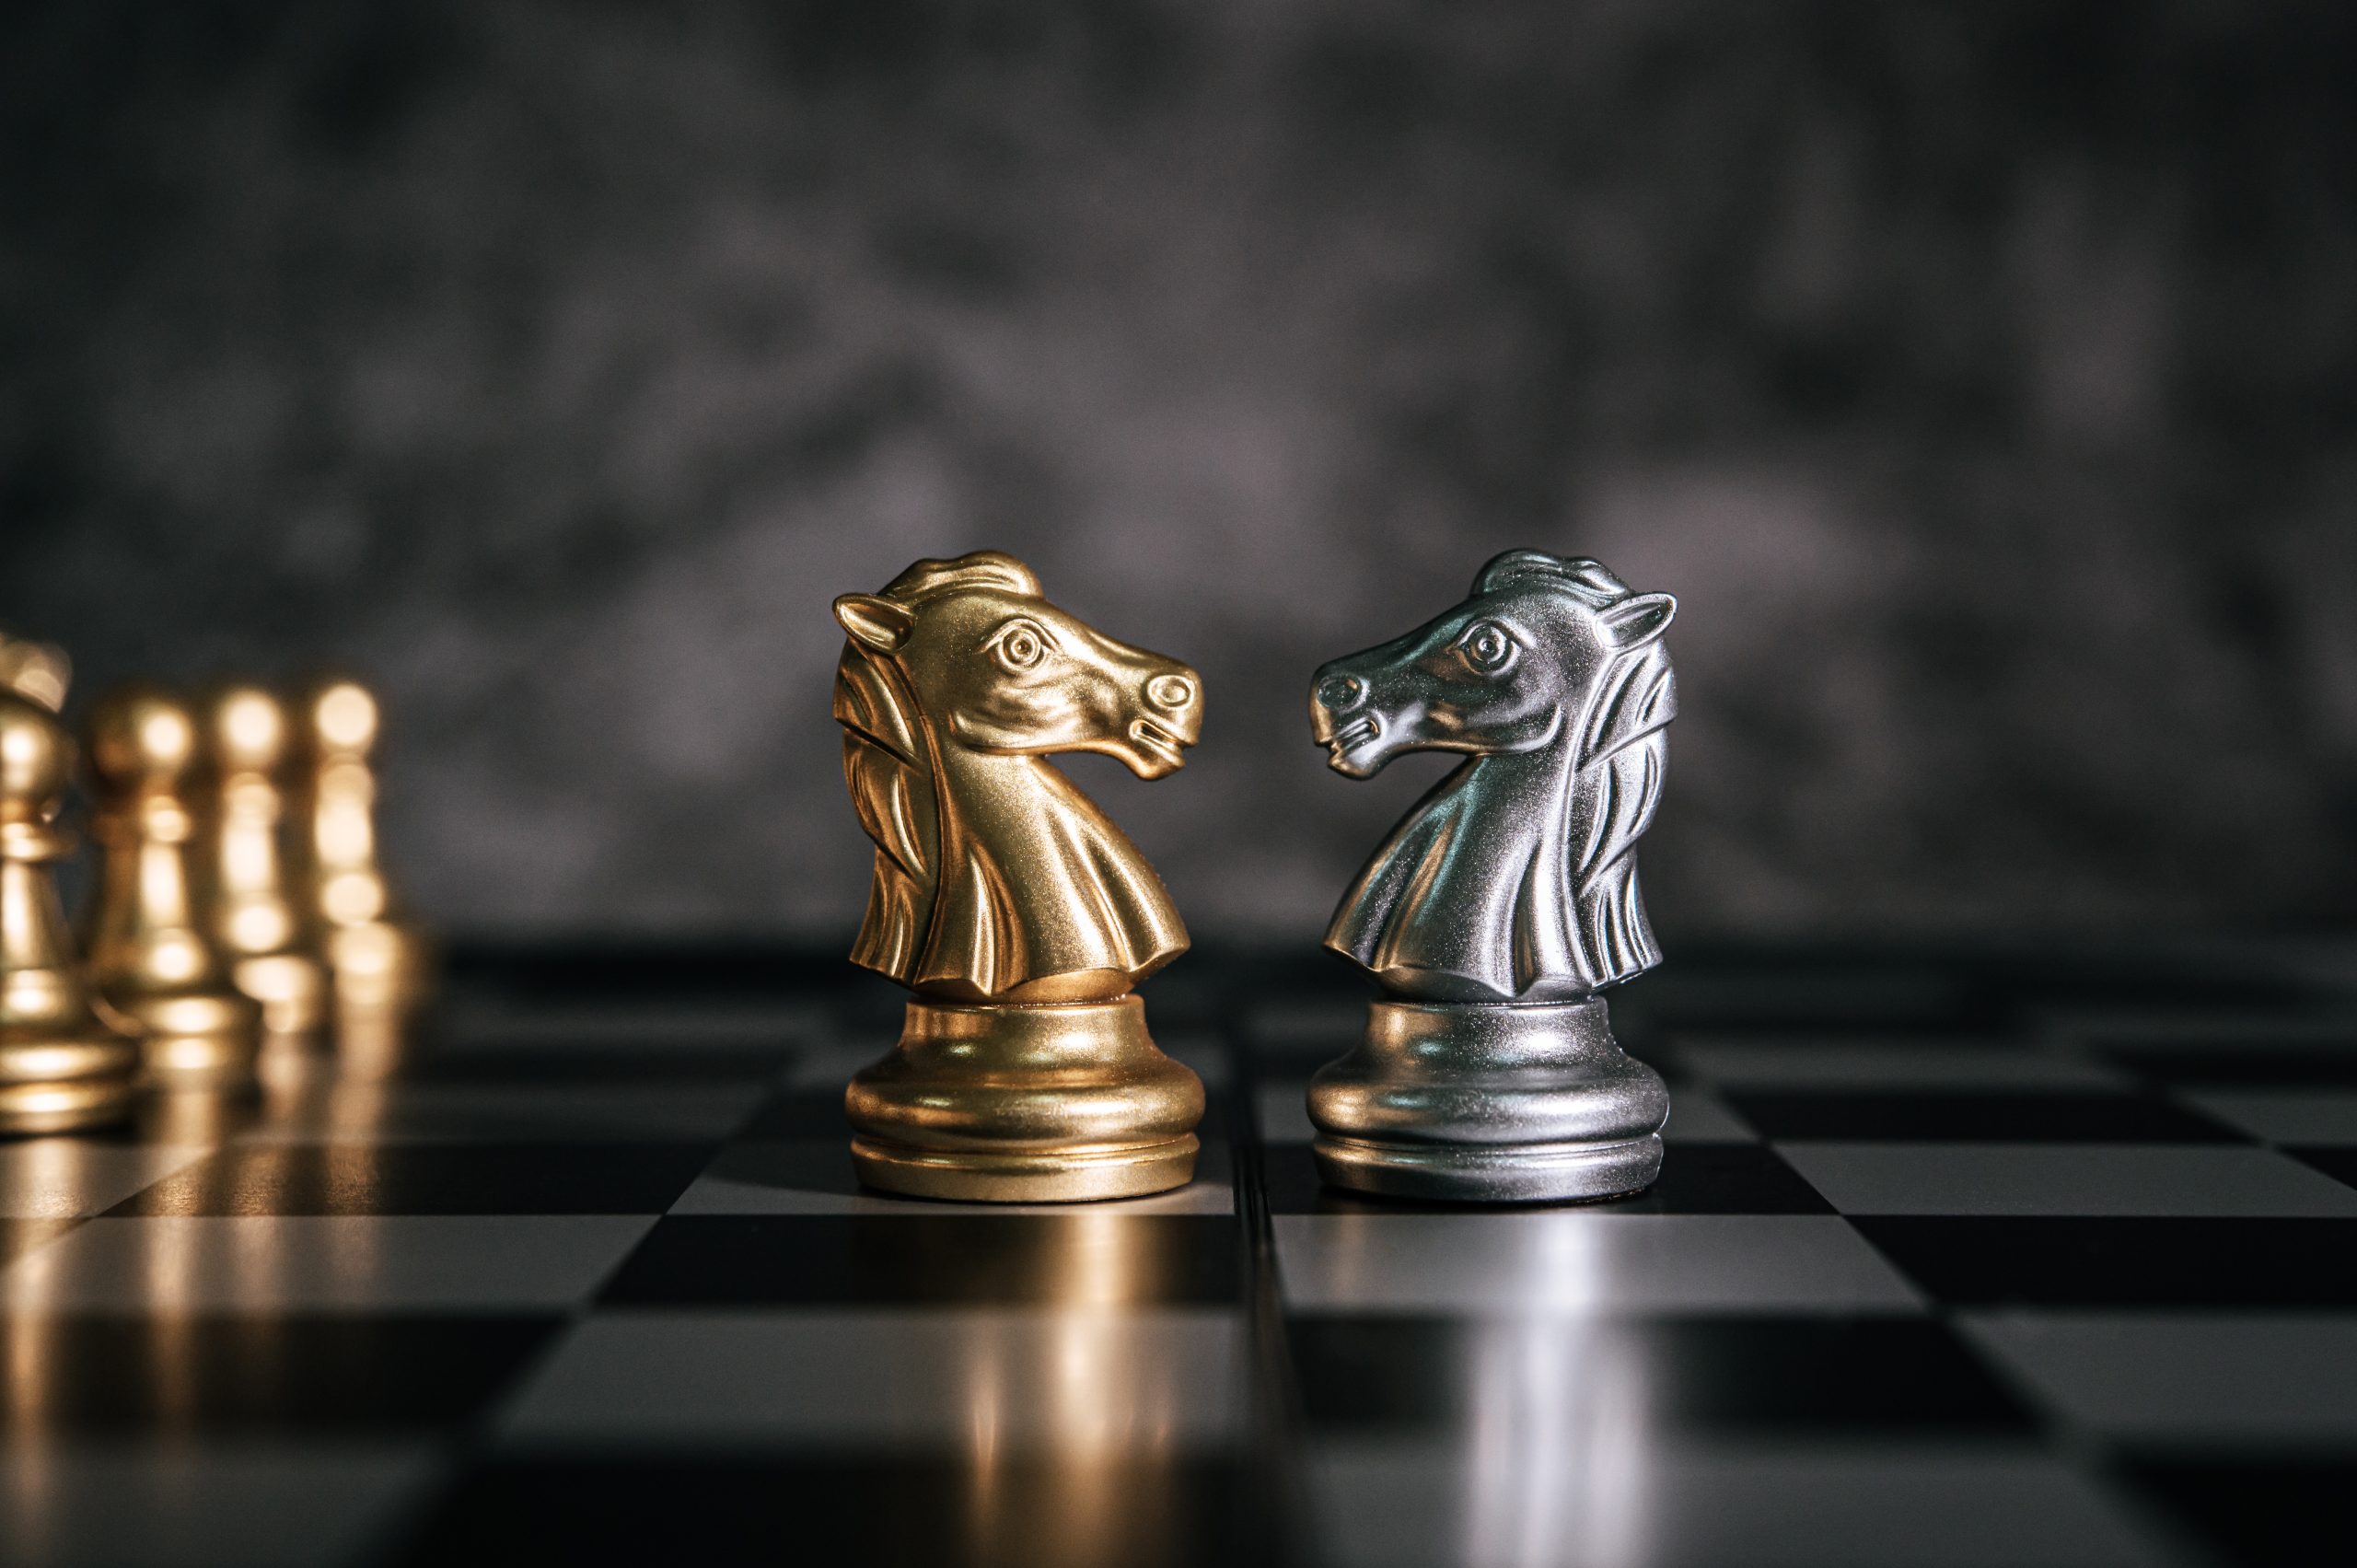 Gold And Silver Chess On Chess Board Game For Business Metaphor